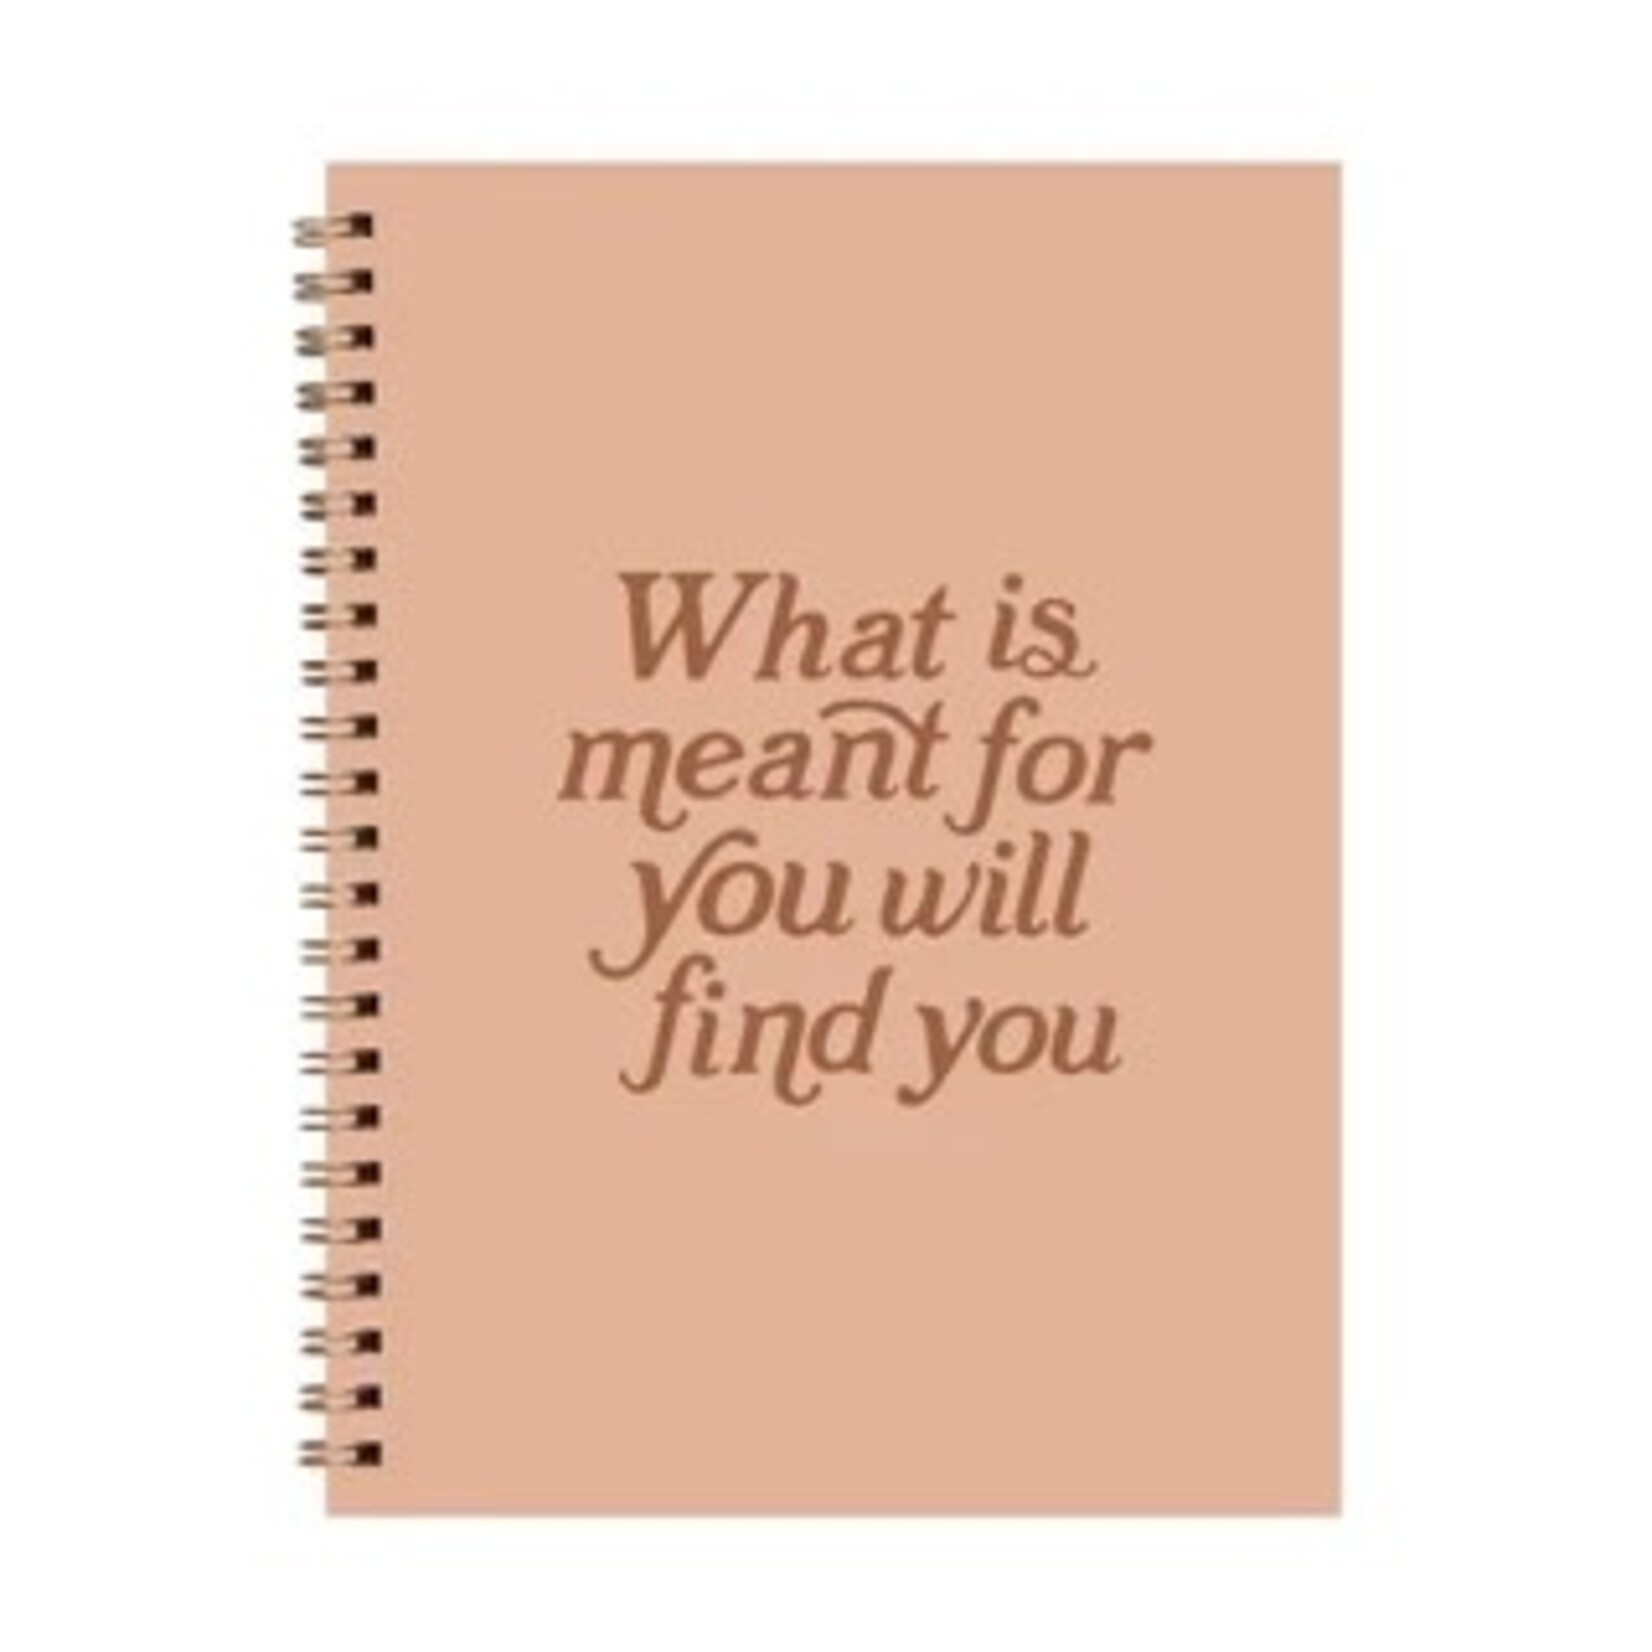 Kicks and Giggles Journal - What is Meant for You Will Find You